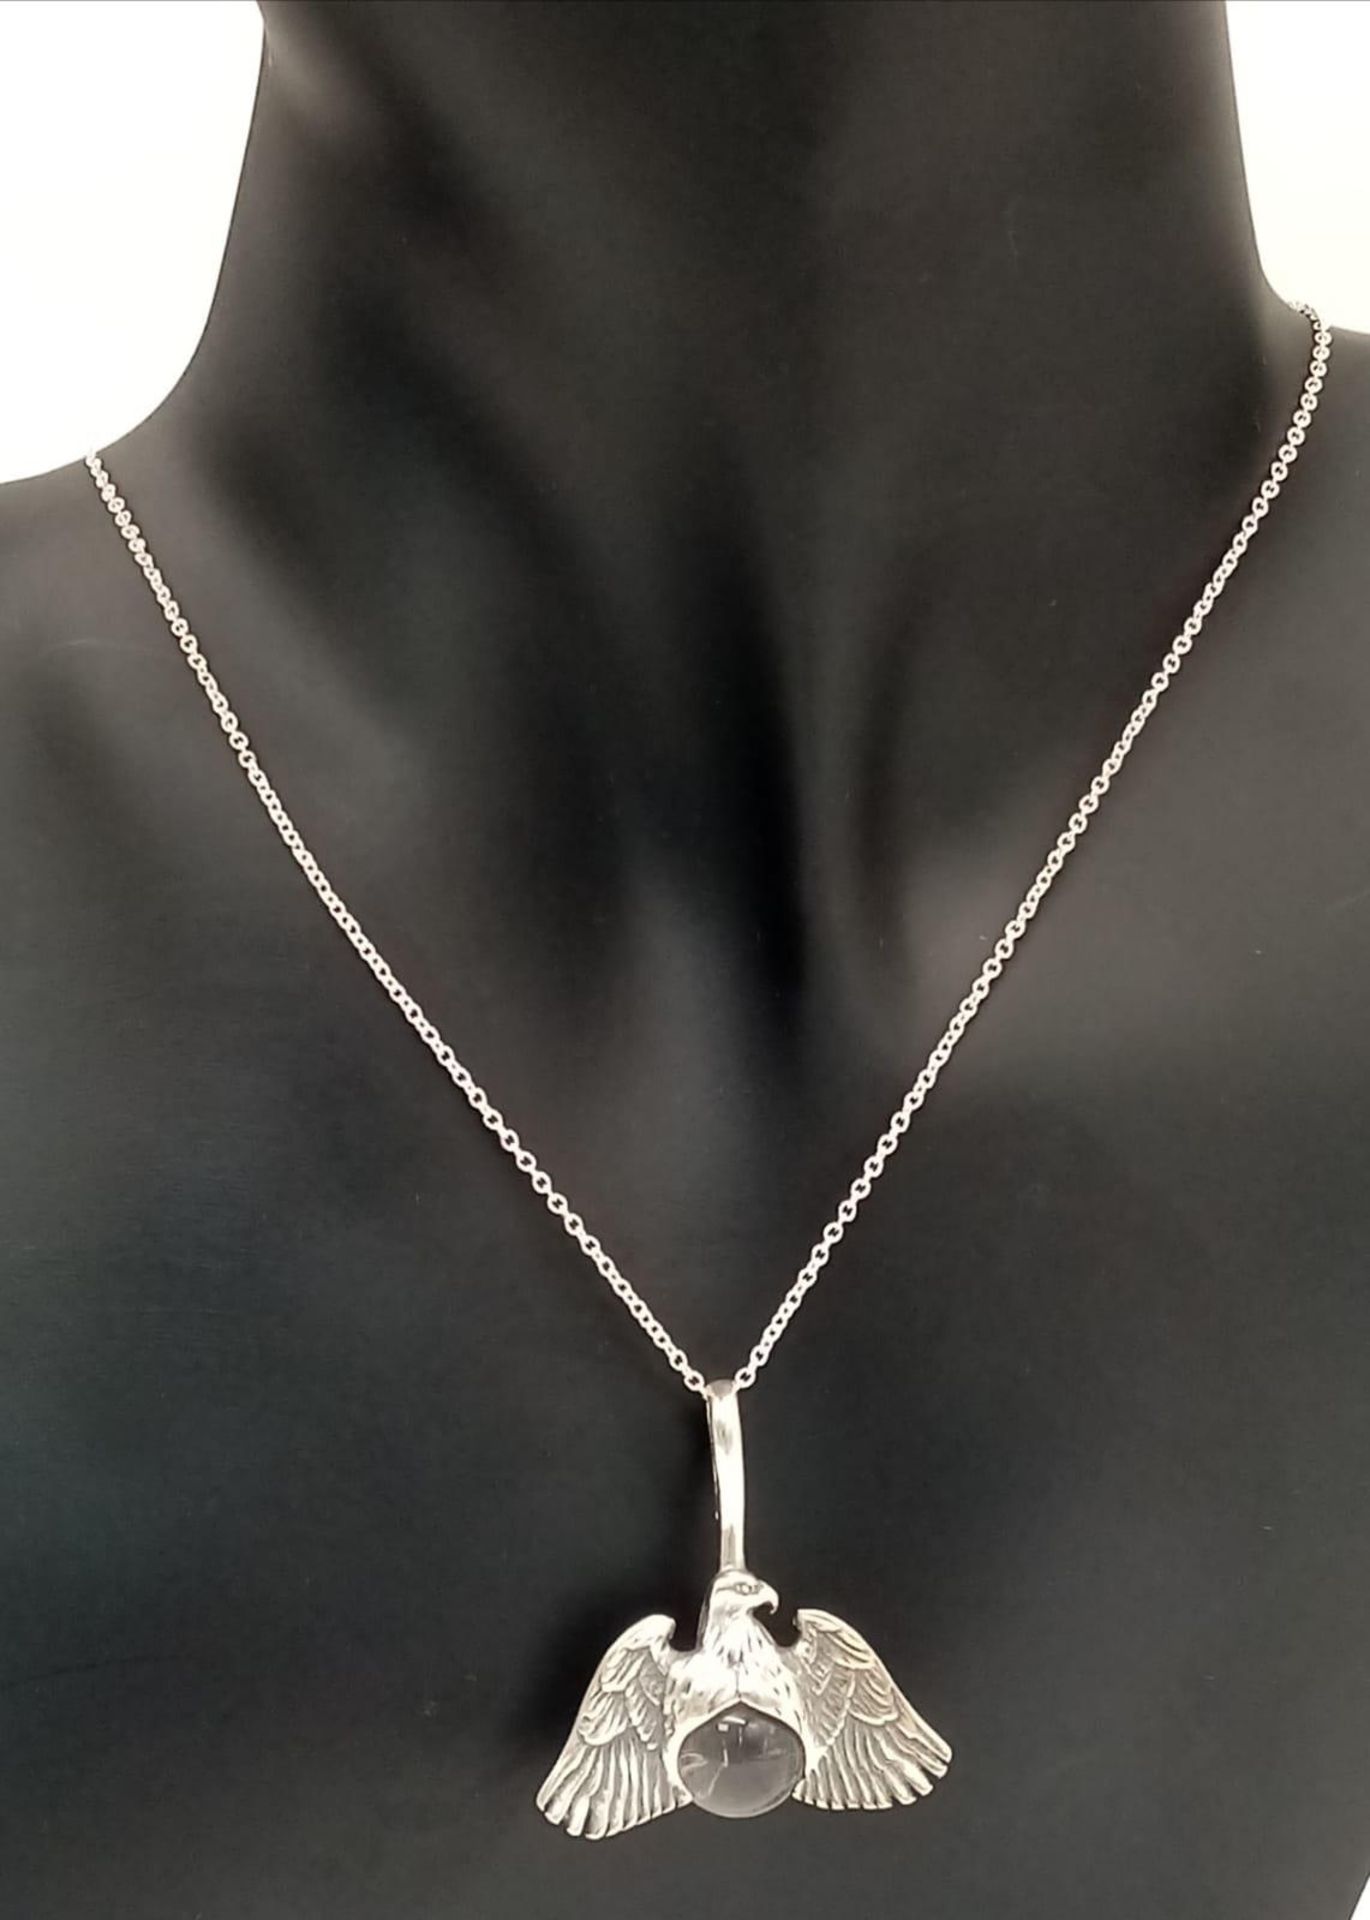 A Unique Sterling Silver Eagle and Crystal Ball Pendant Necklace. Sterling Silver Pendant Measures